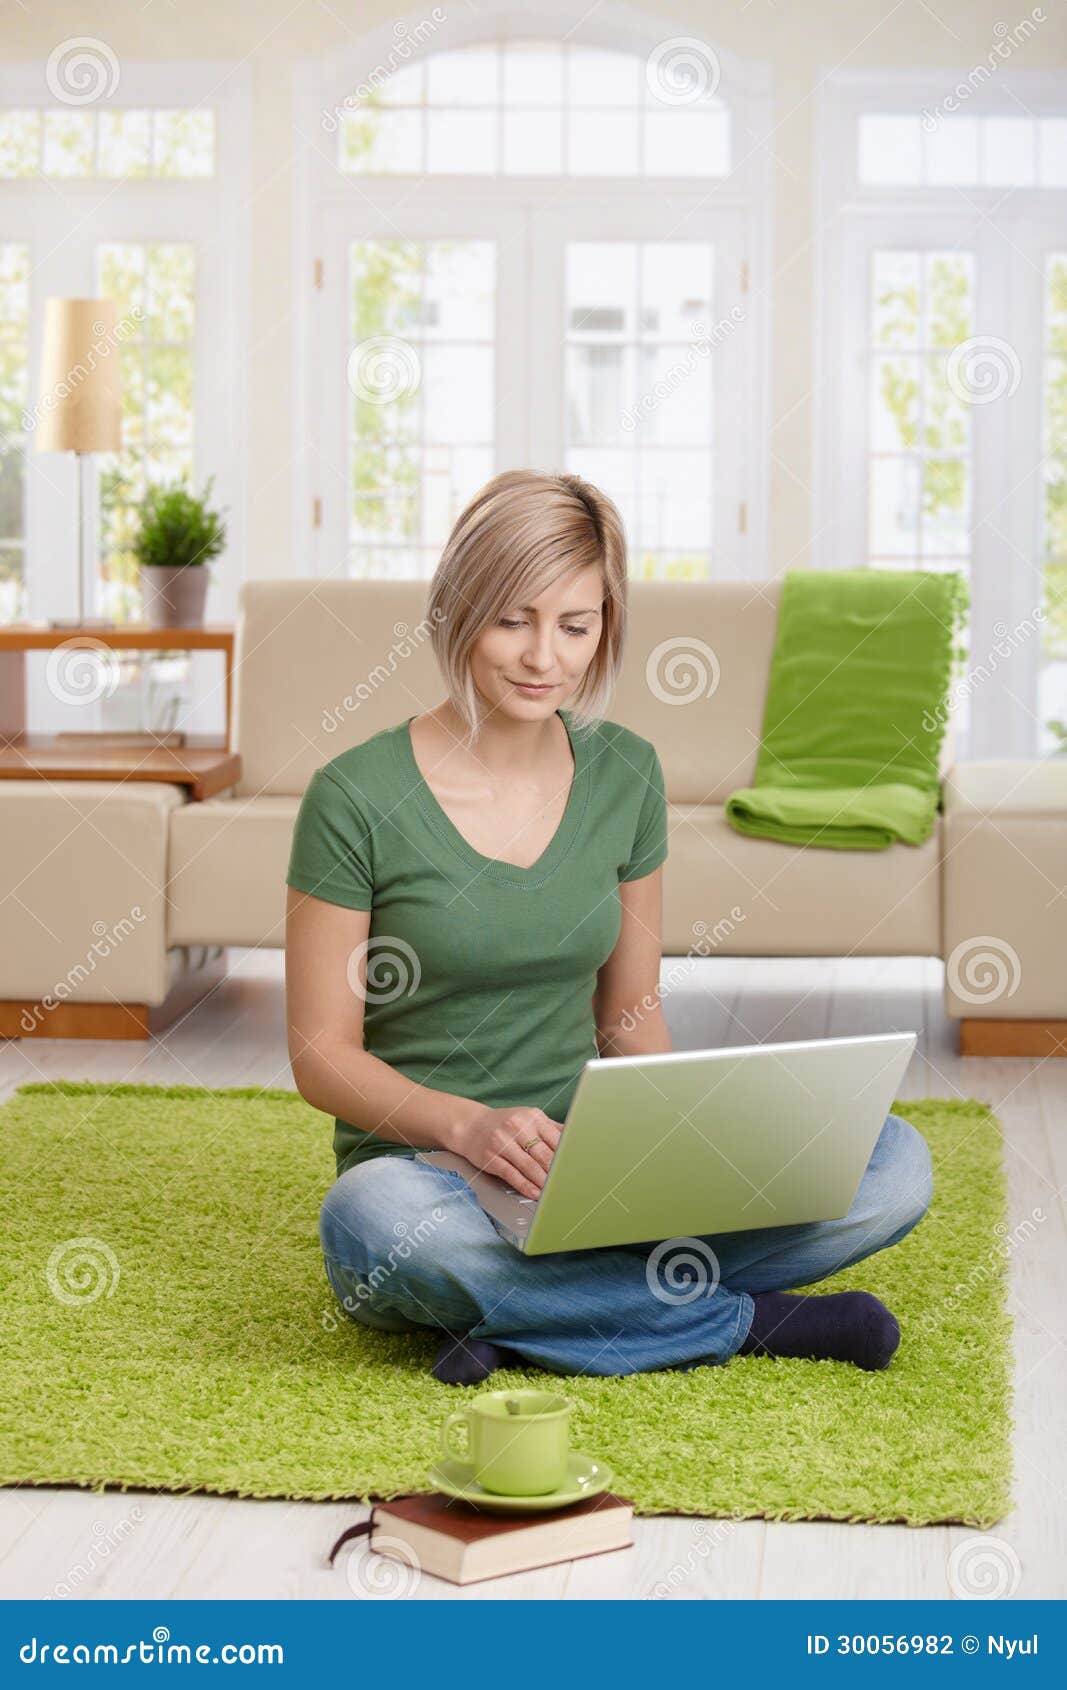 young woman teleworking with computer